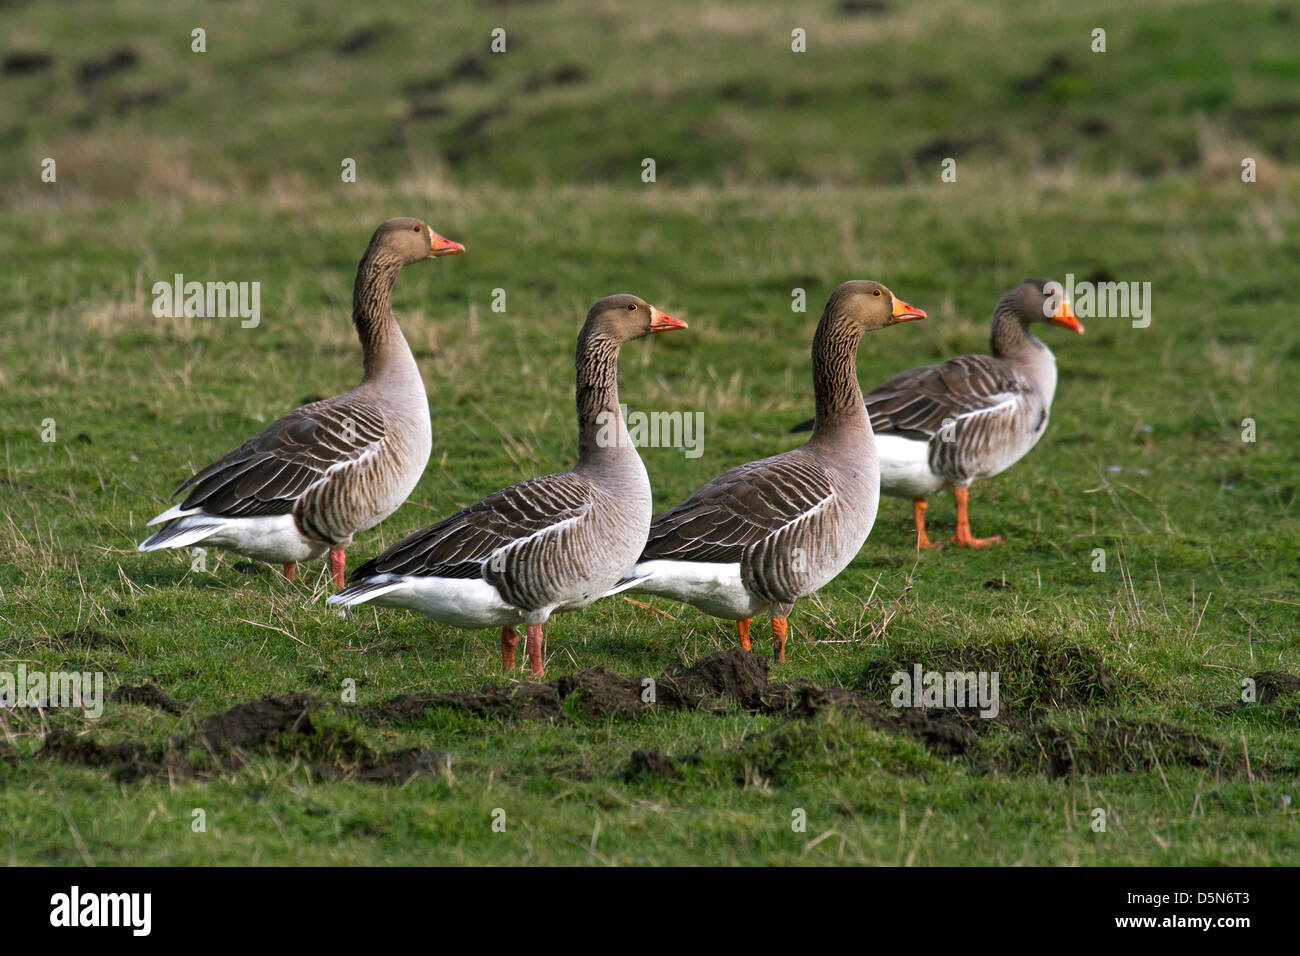 Greylag geese / graylag goose (Anser anser) flock foraging in meadow Stock Photo